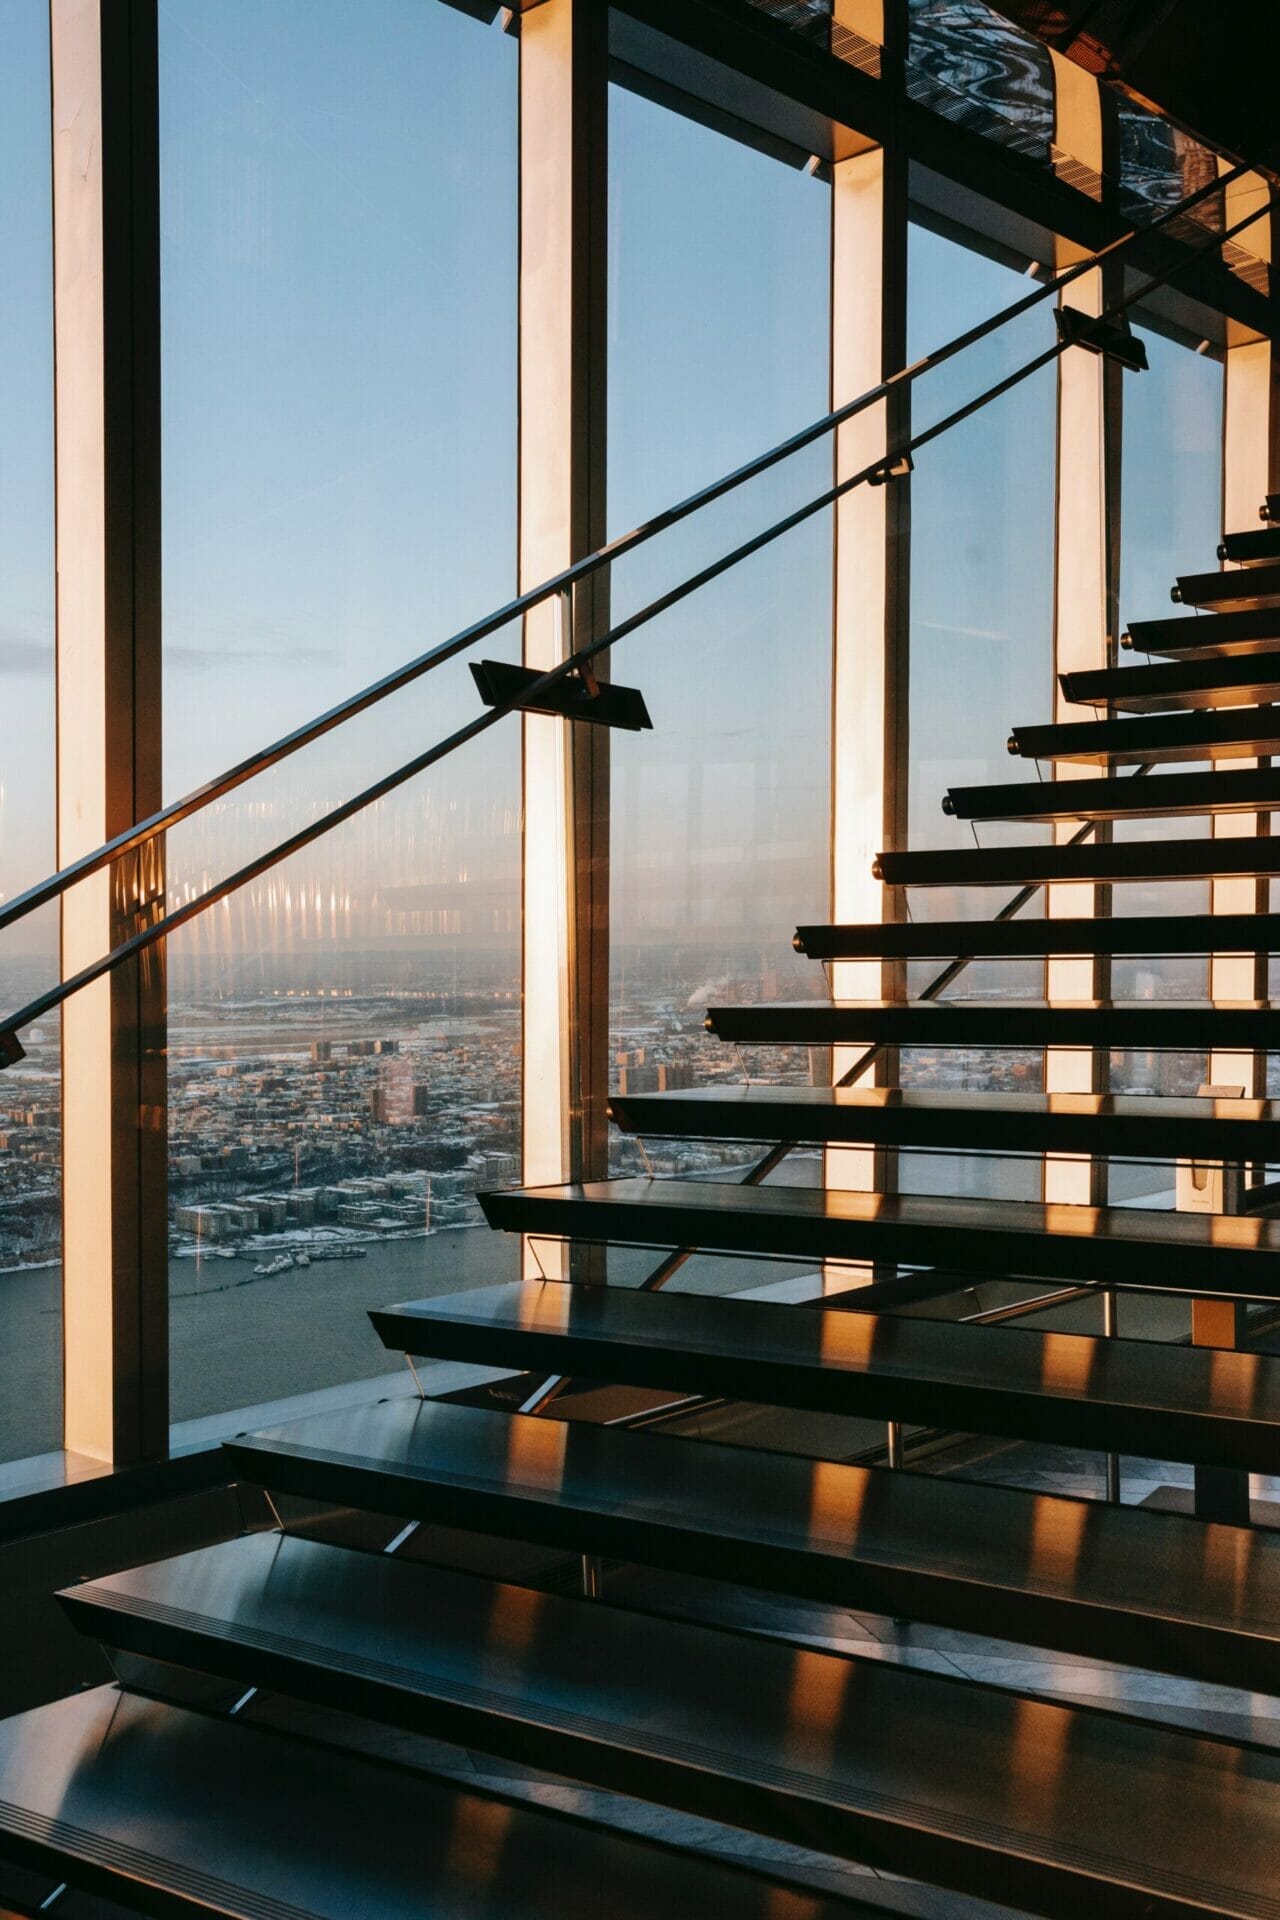 Office building staircase with window view of city